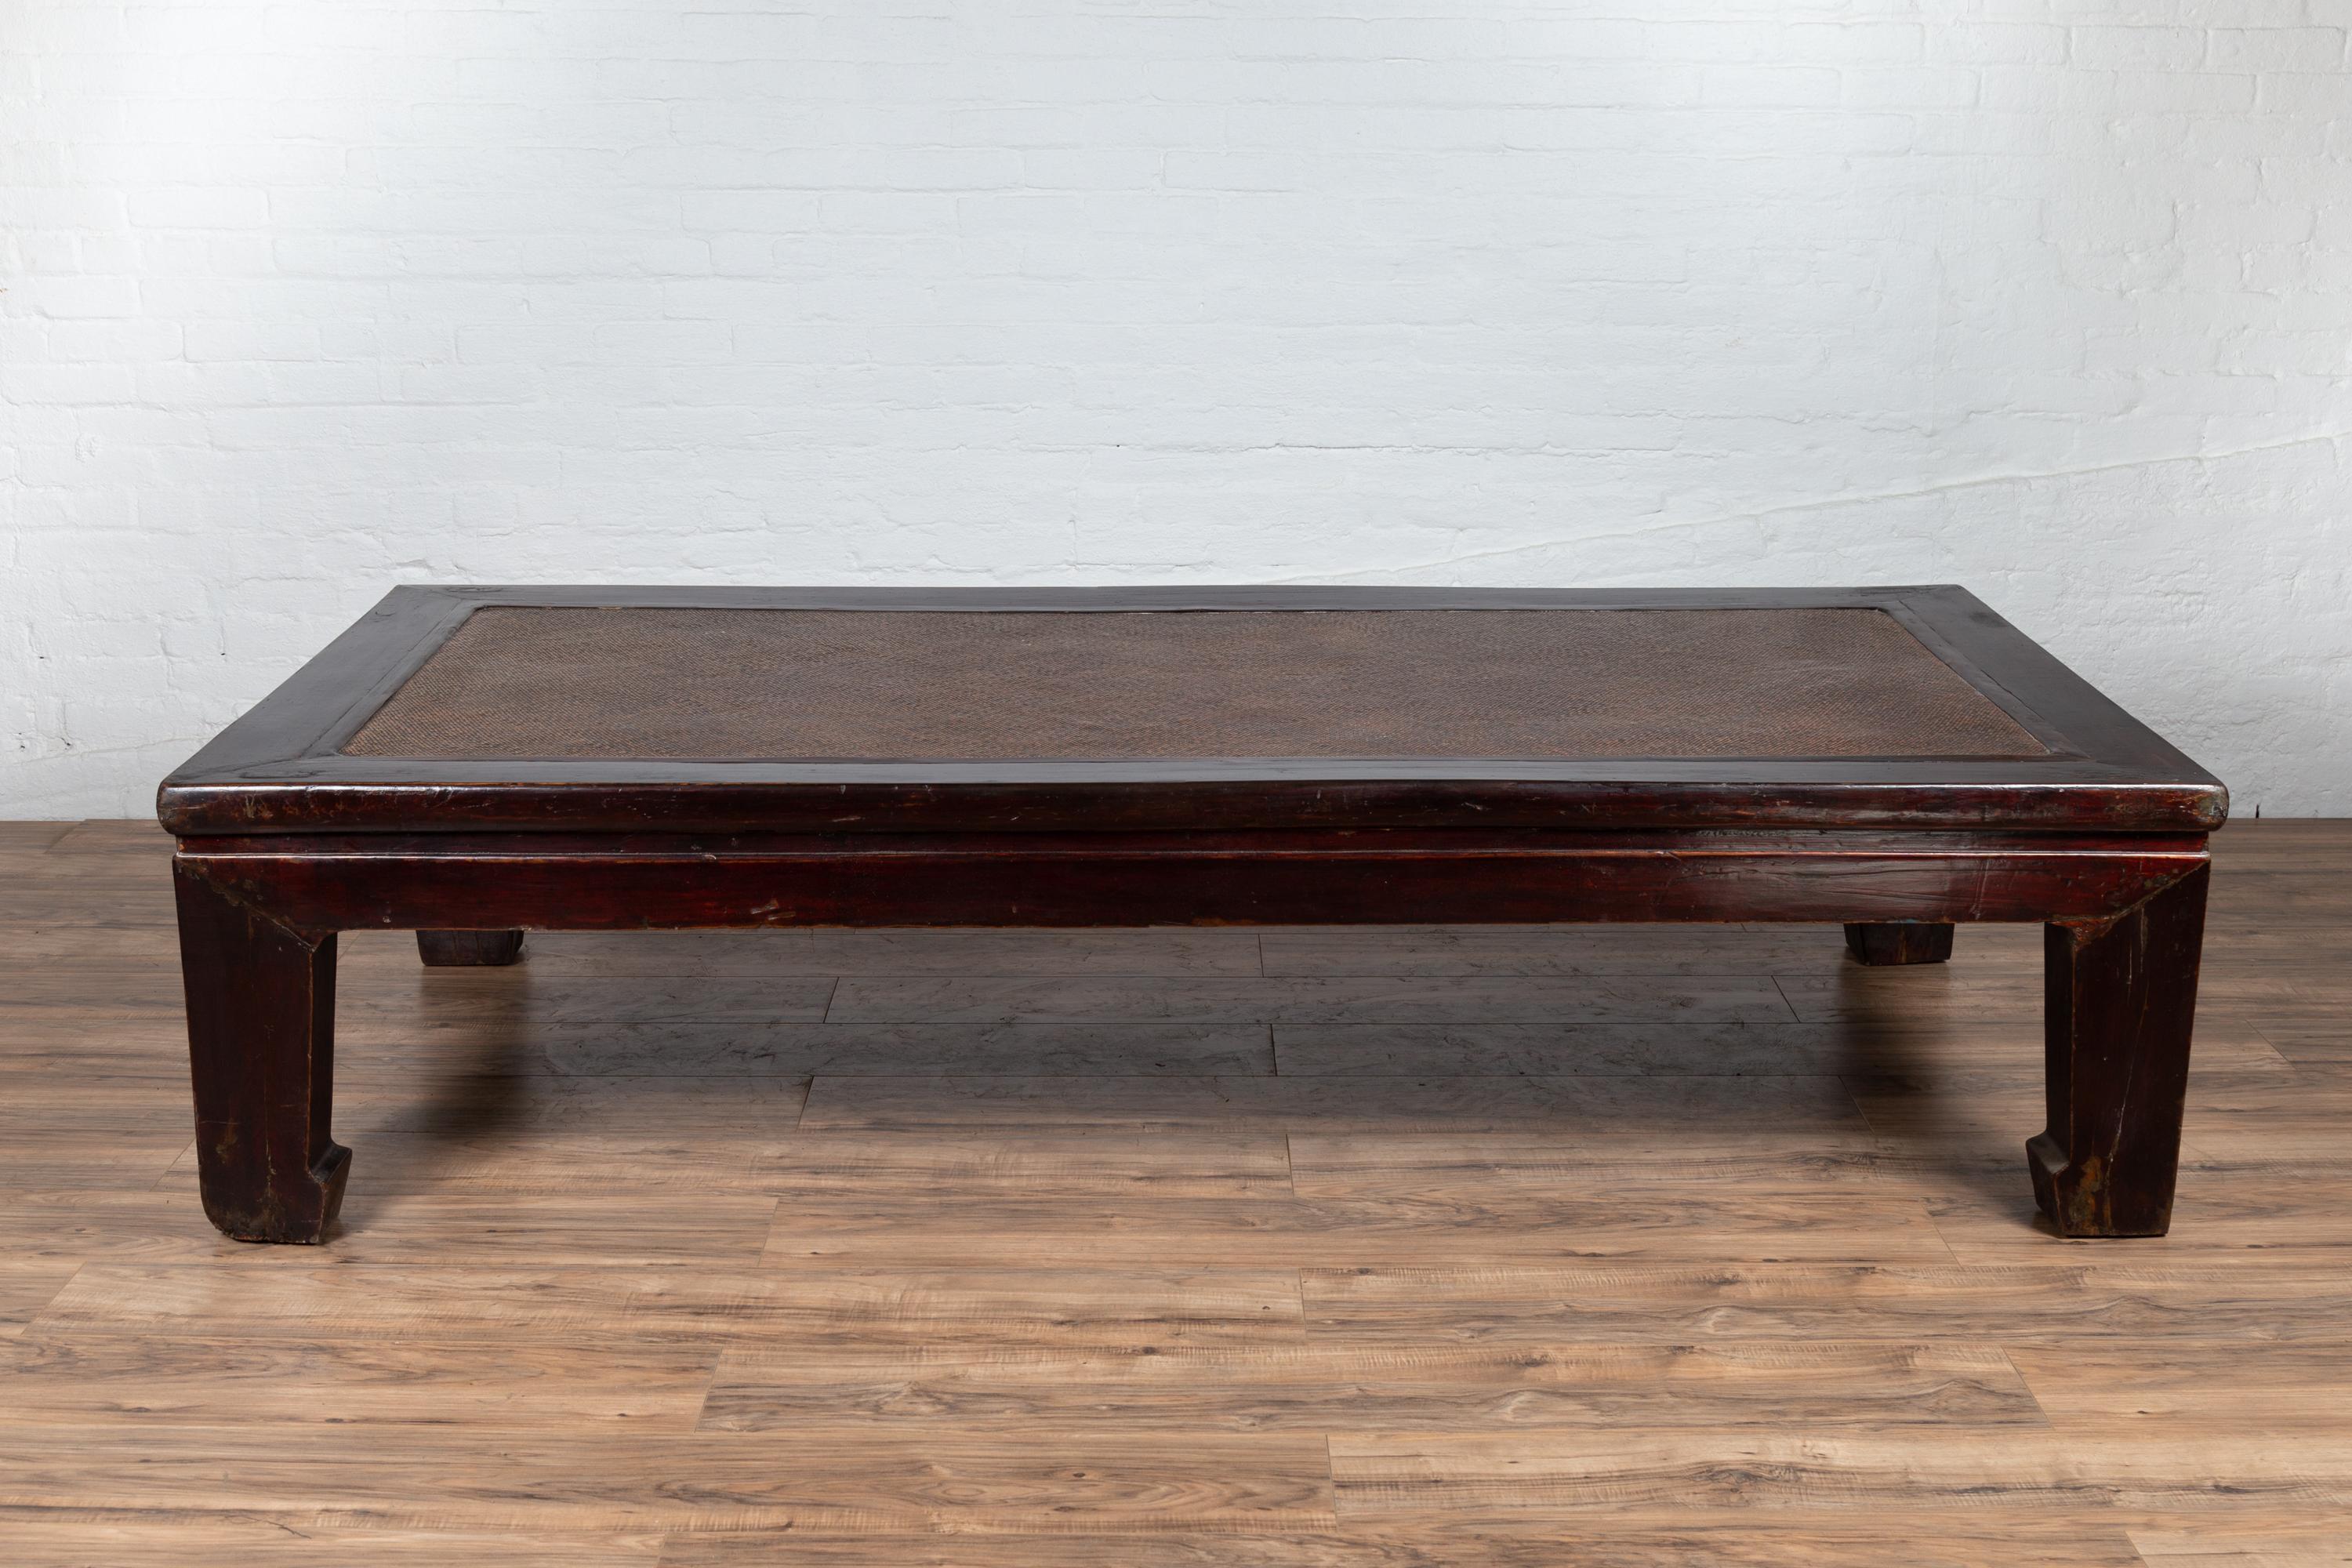 Antique Chinese Wooden Coffee Table with Dark Patina and Woven Rattan Top 4